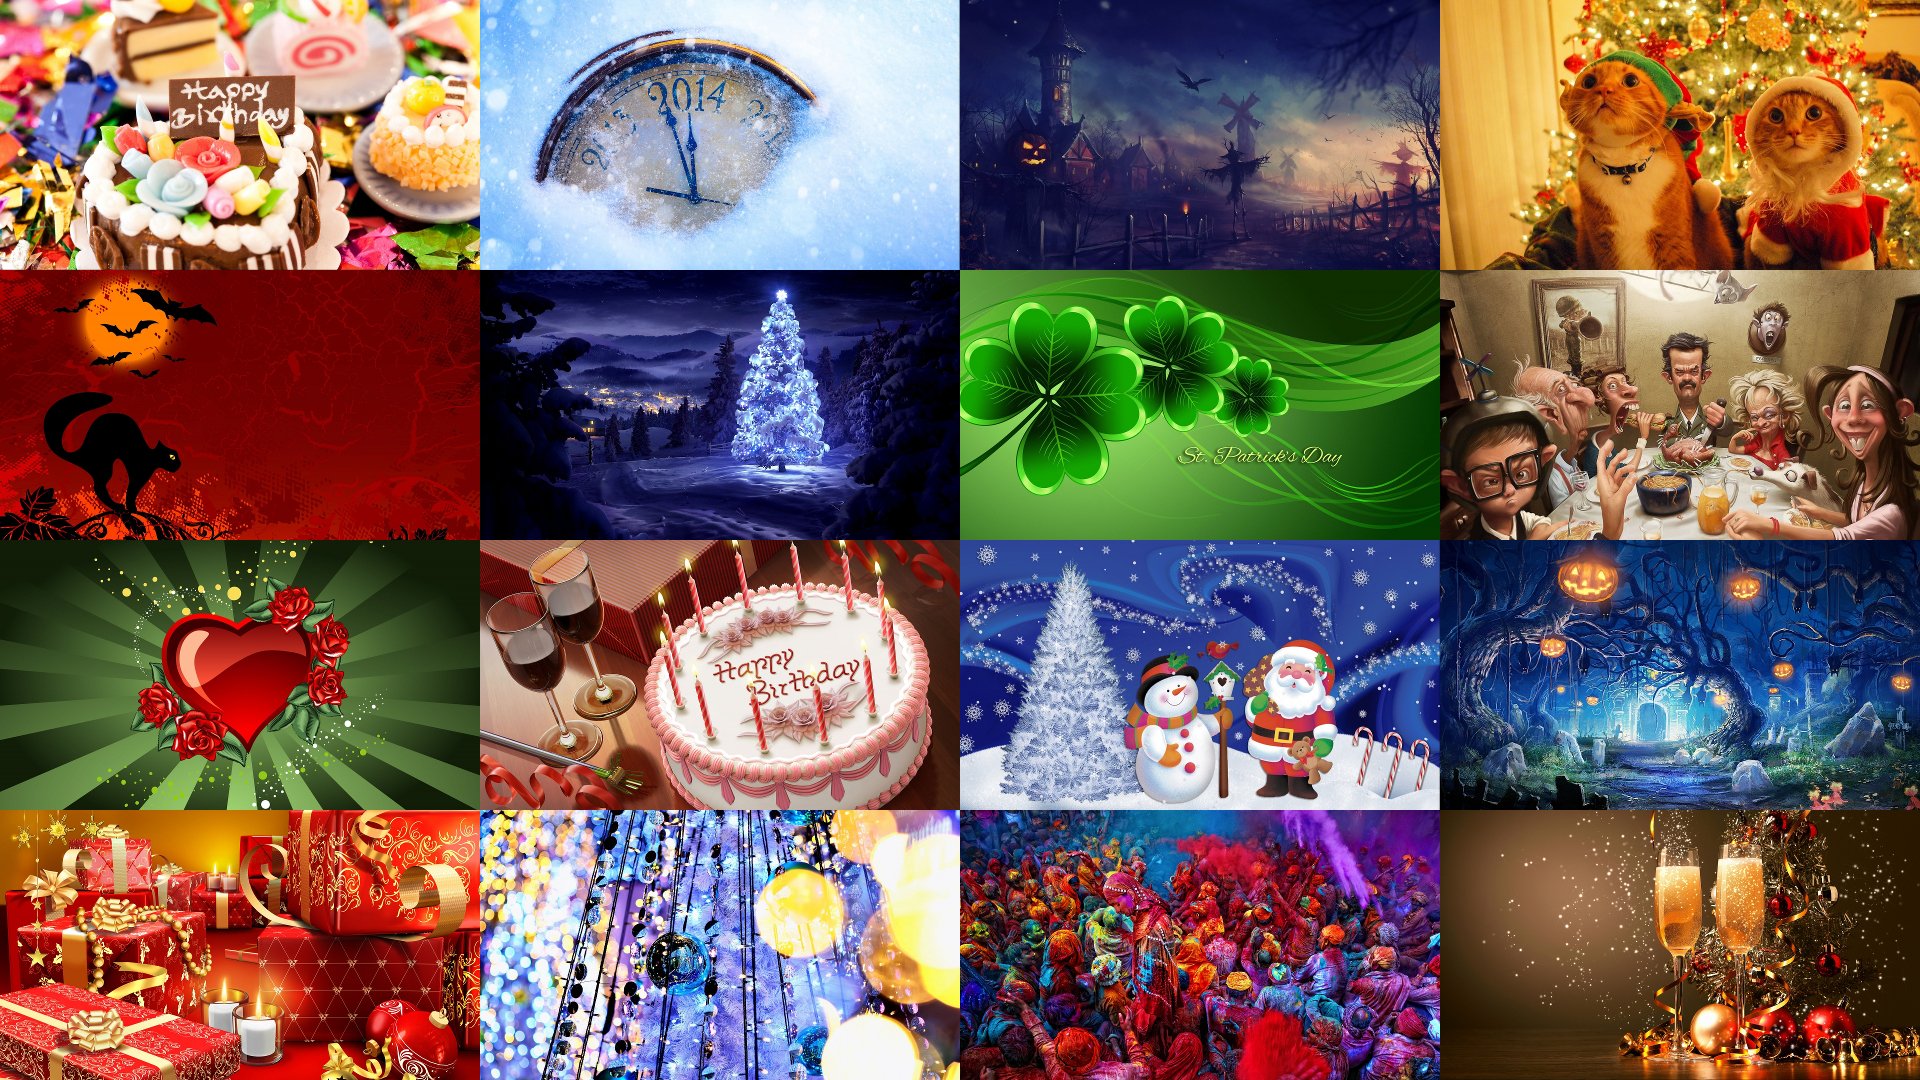 Disney Holiday Wallpapers - D23